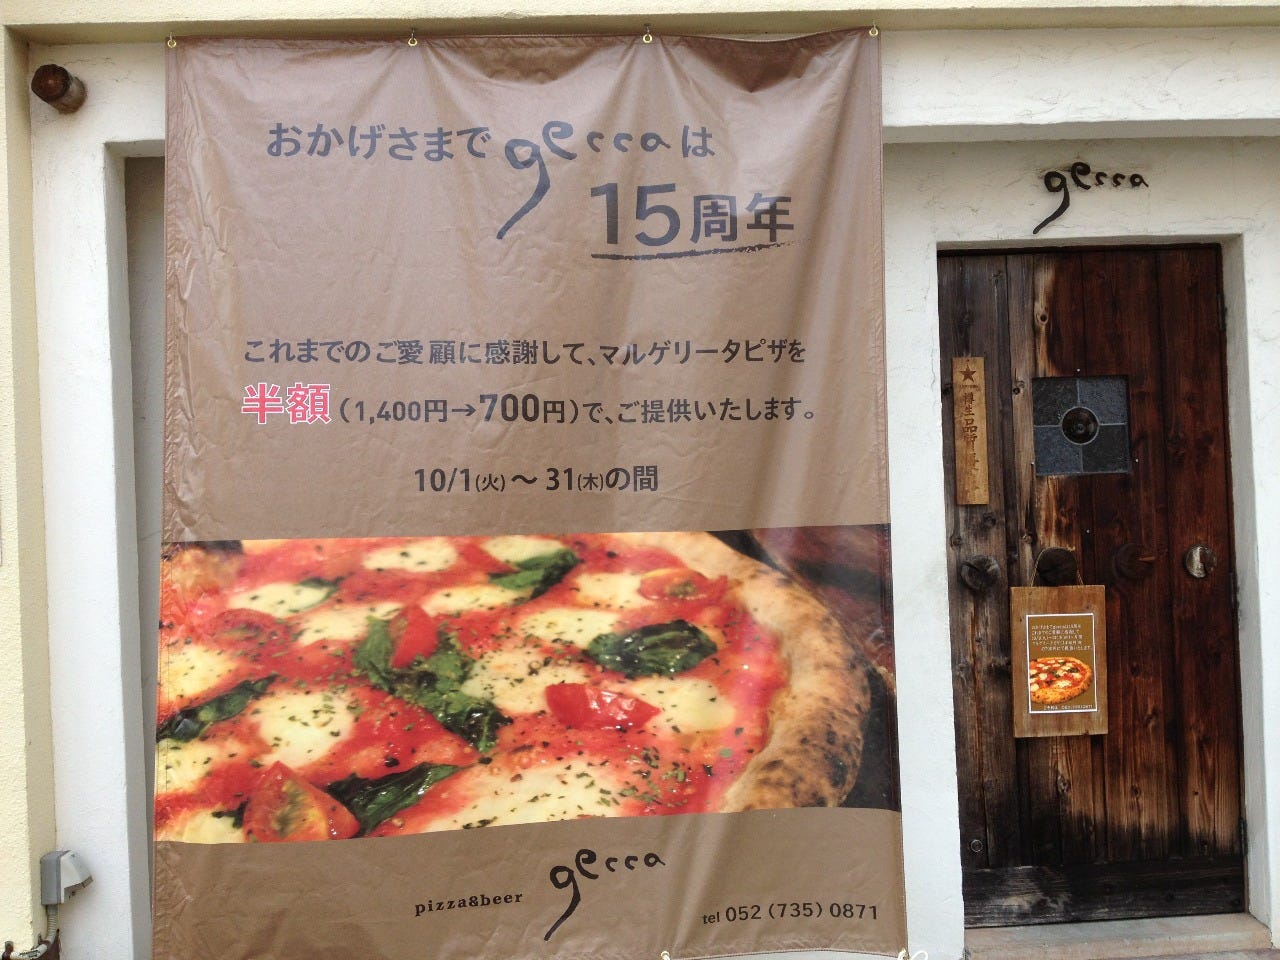 pizza&beer gecca (ピザ&ビア ゲッカ) image